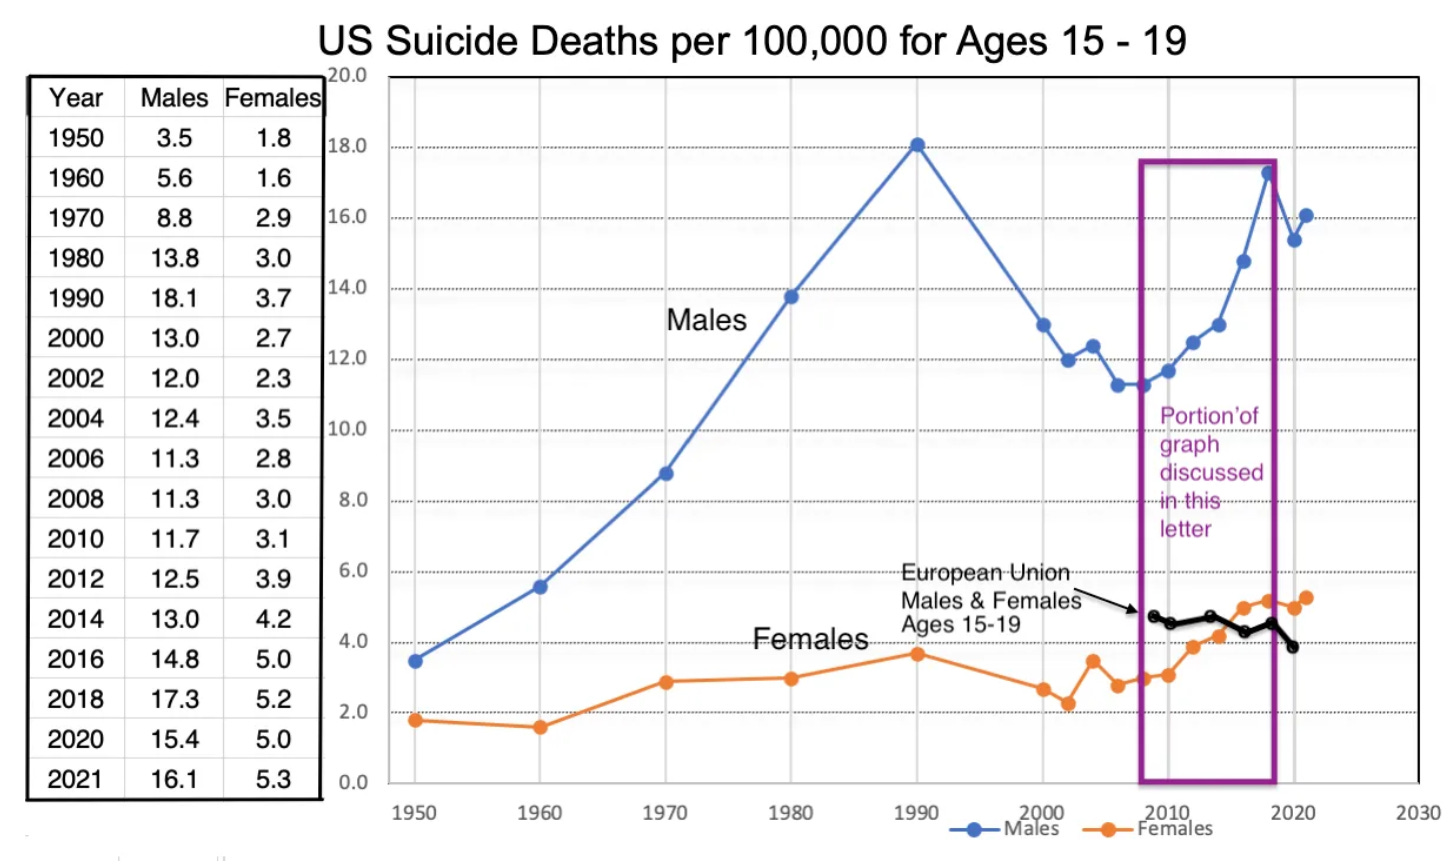 Suicide trends in the United States and the European Union